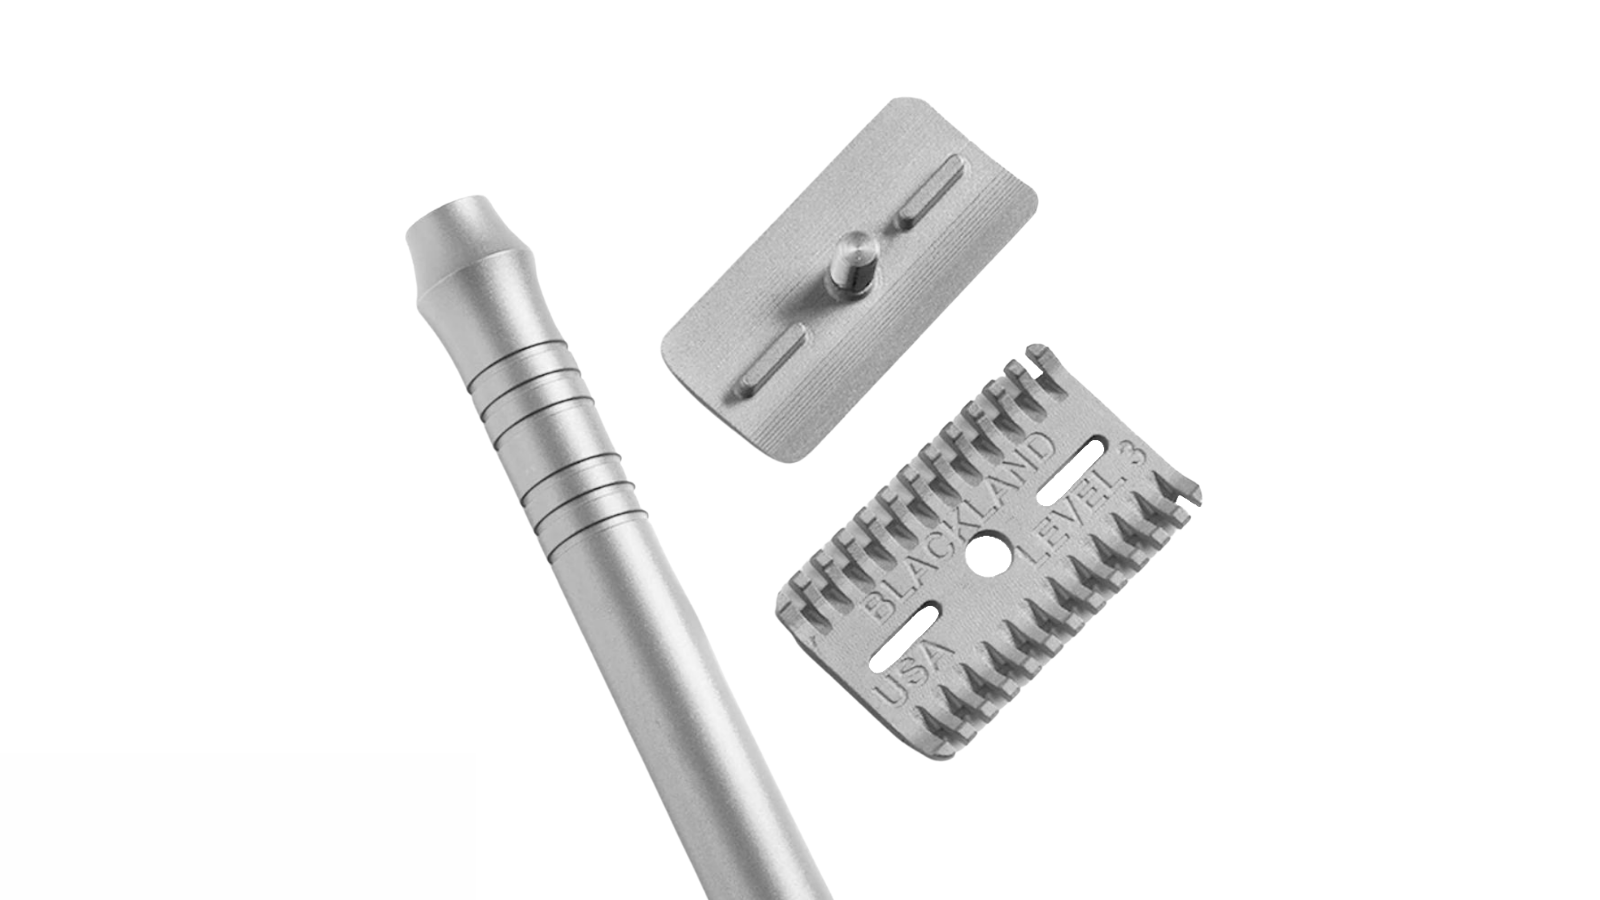 Three 3D printing case studies on metal shaving razor components isolated on a white background: handle, blade, and head.